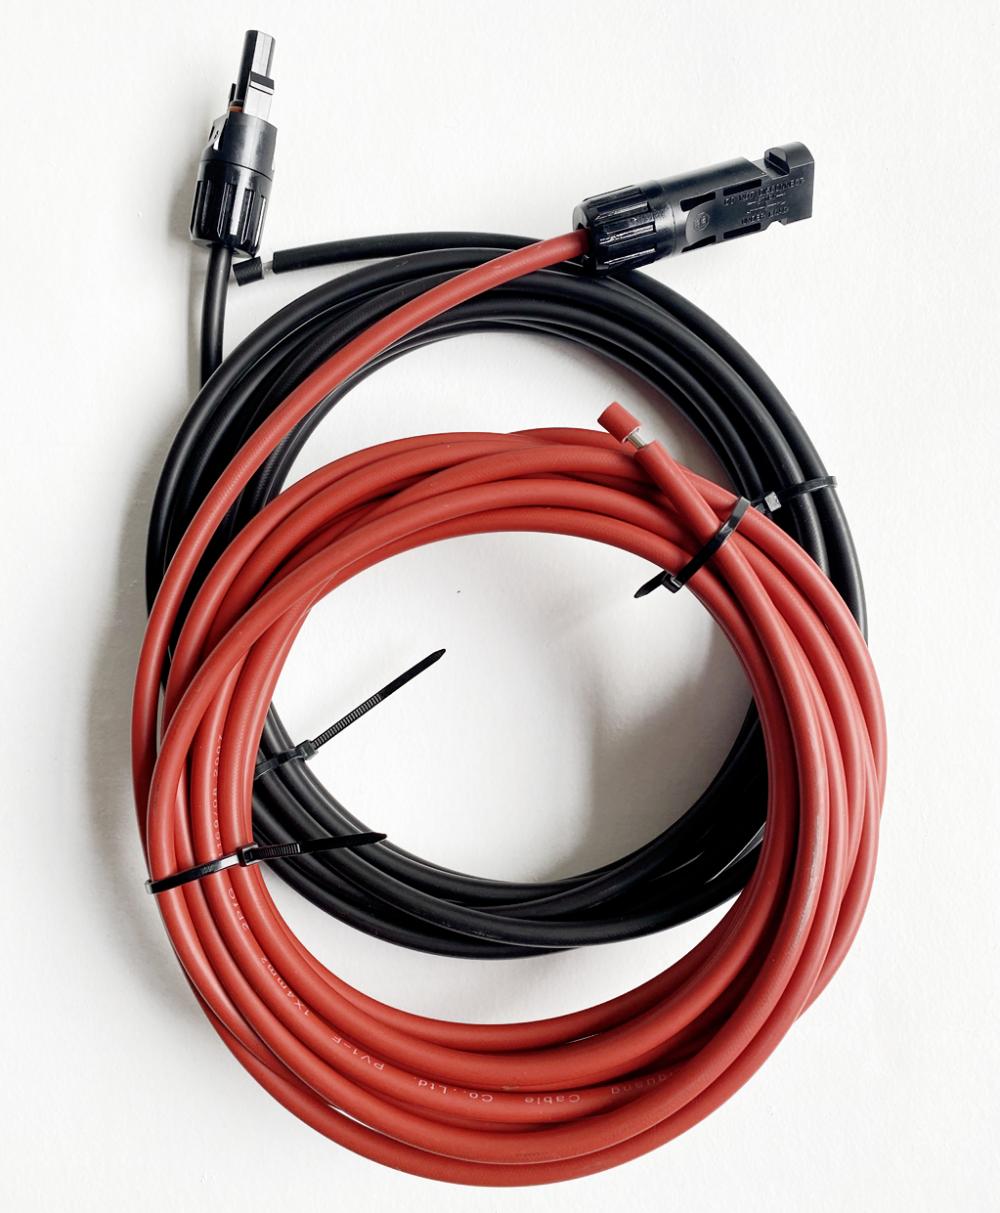 Solar cable 5 meters(positive and negative) 2.5mm2 with MC4 plugs